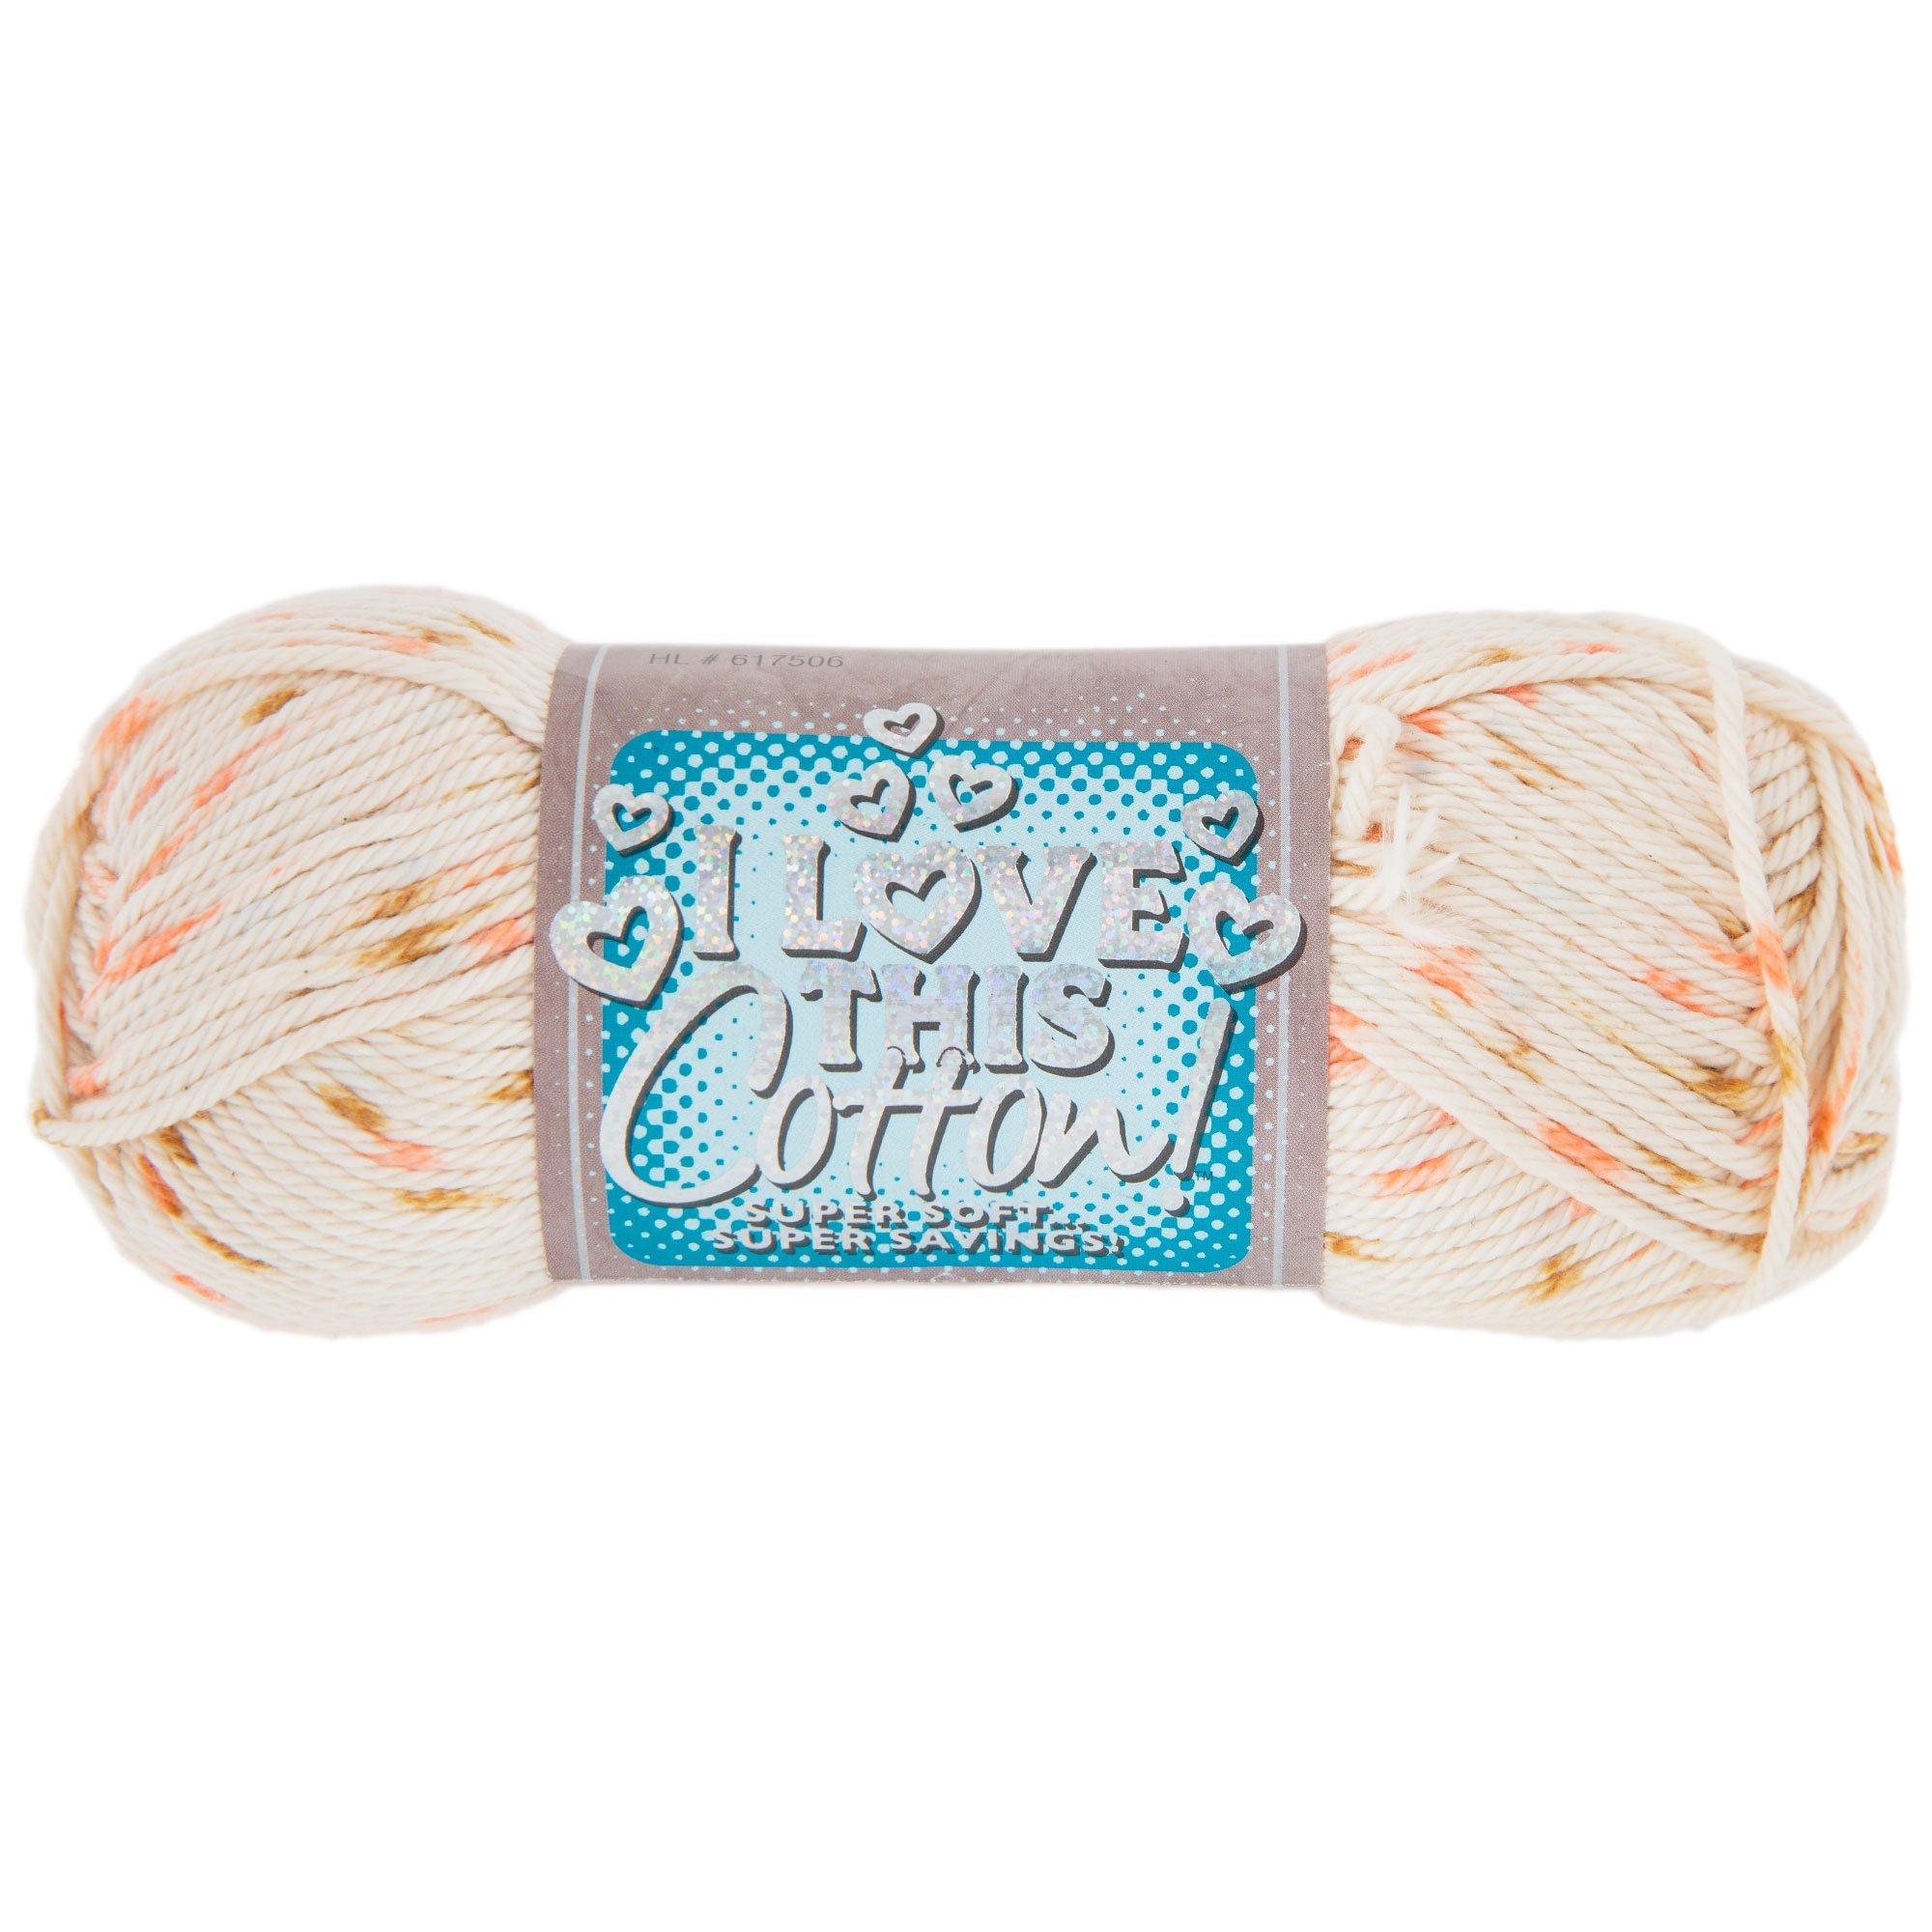 Hobby Lobby's version of Caron Cotton Cakes they're so sweet